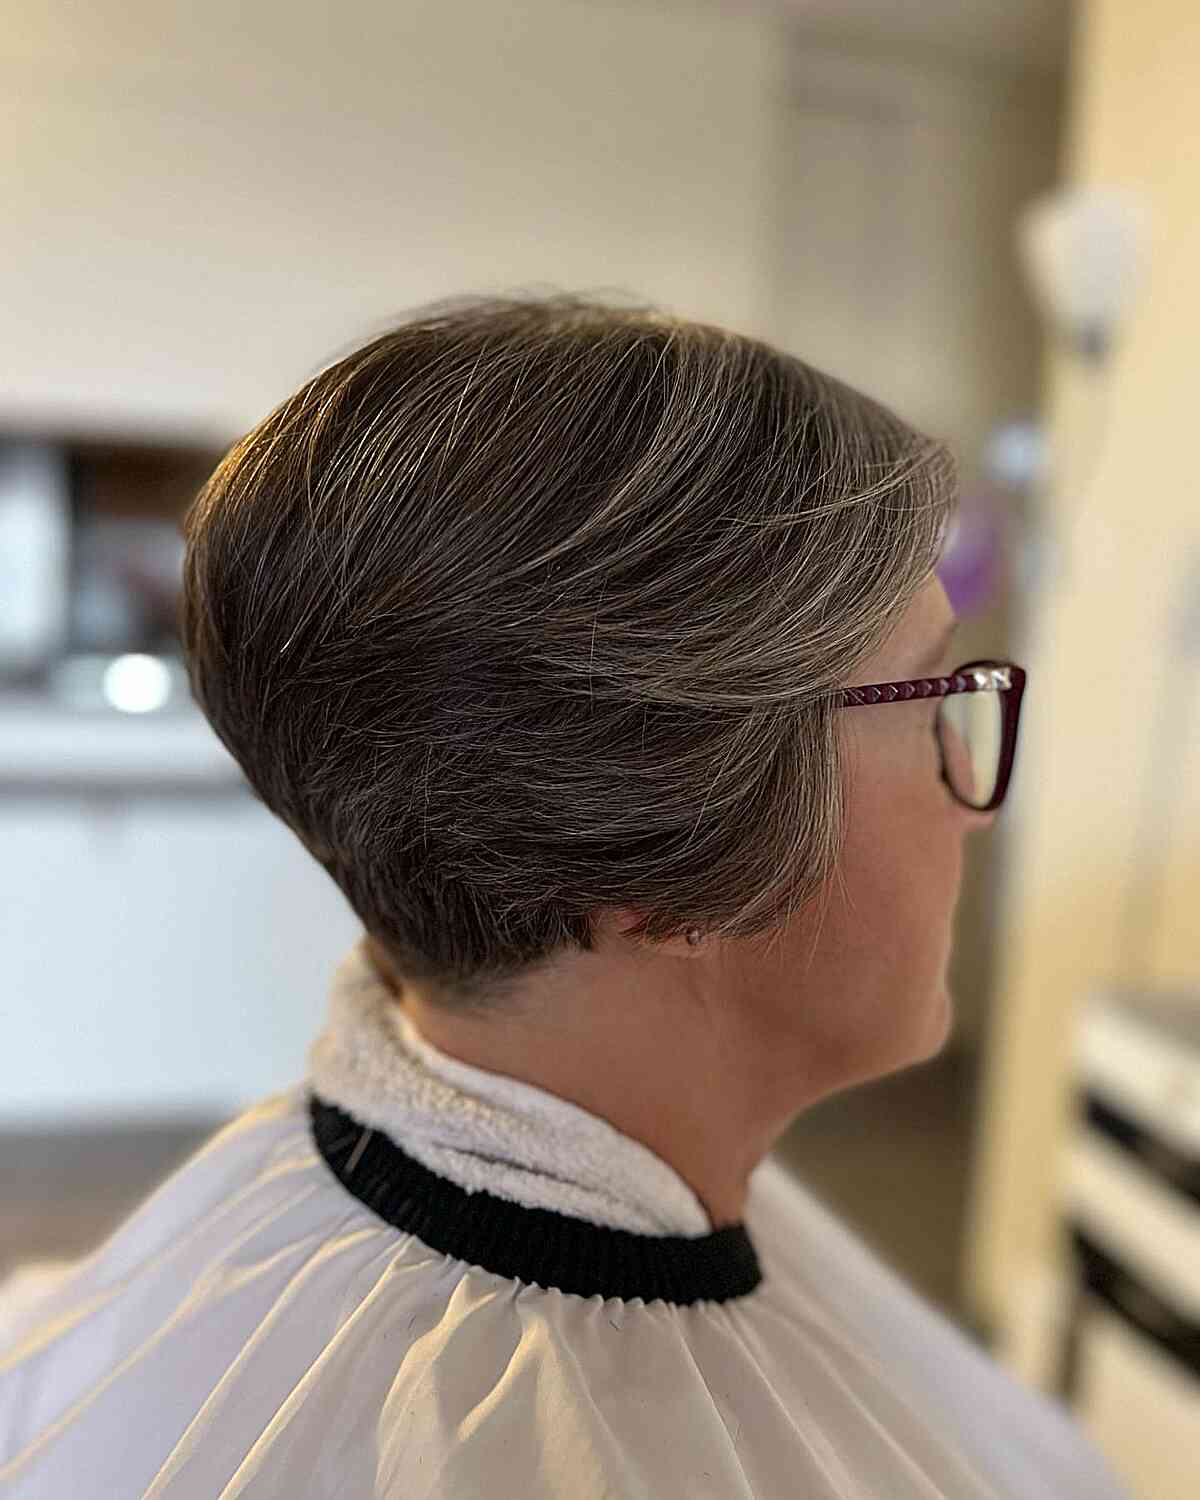 Short Soft Feathered Layered Pixie Cut with Tapered Nape for women aged 60